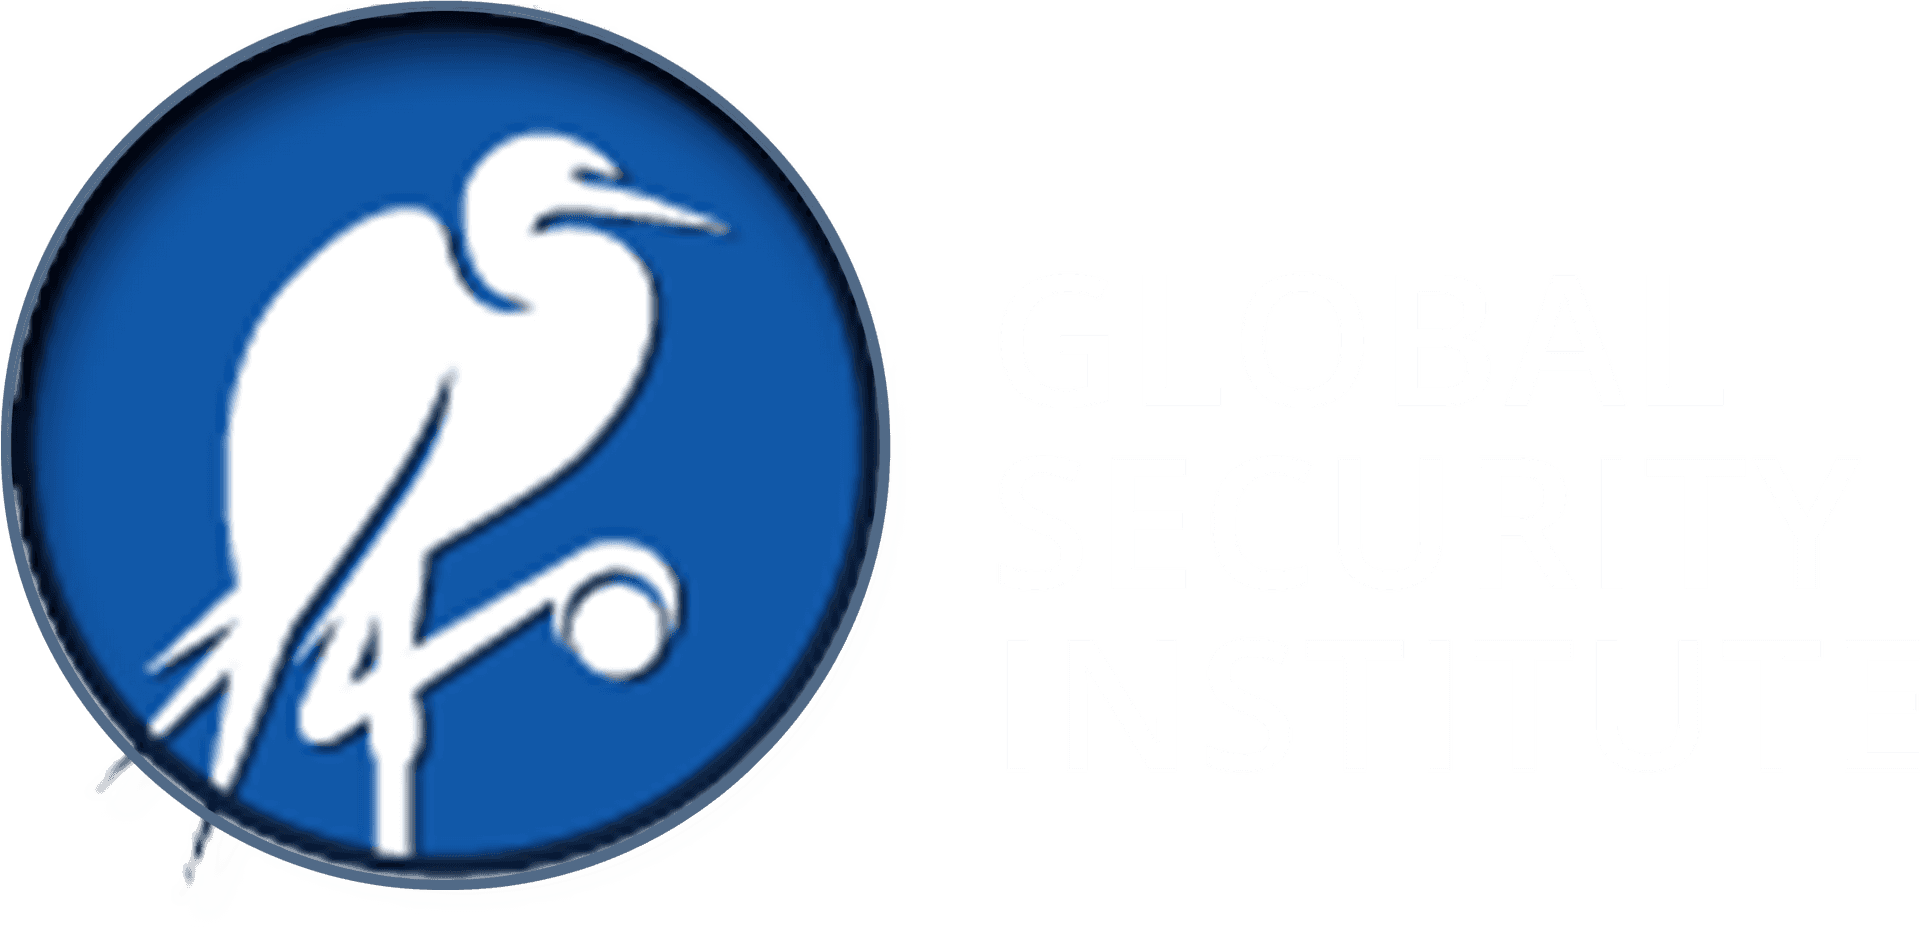 Global Security Institute Logo PNG image